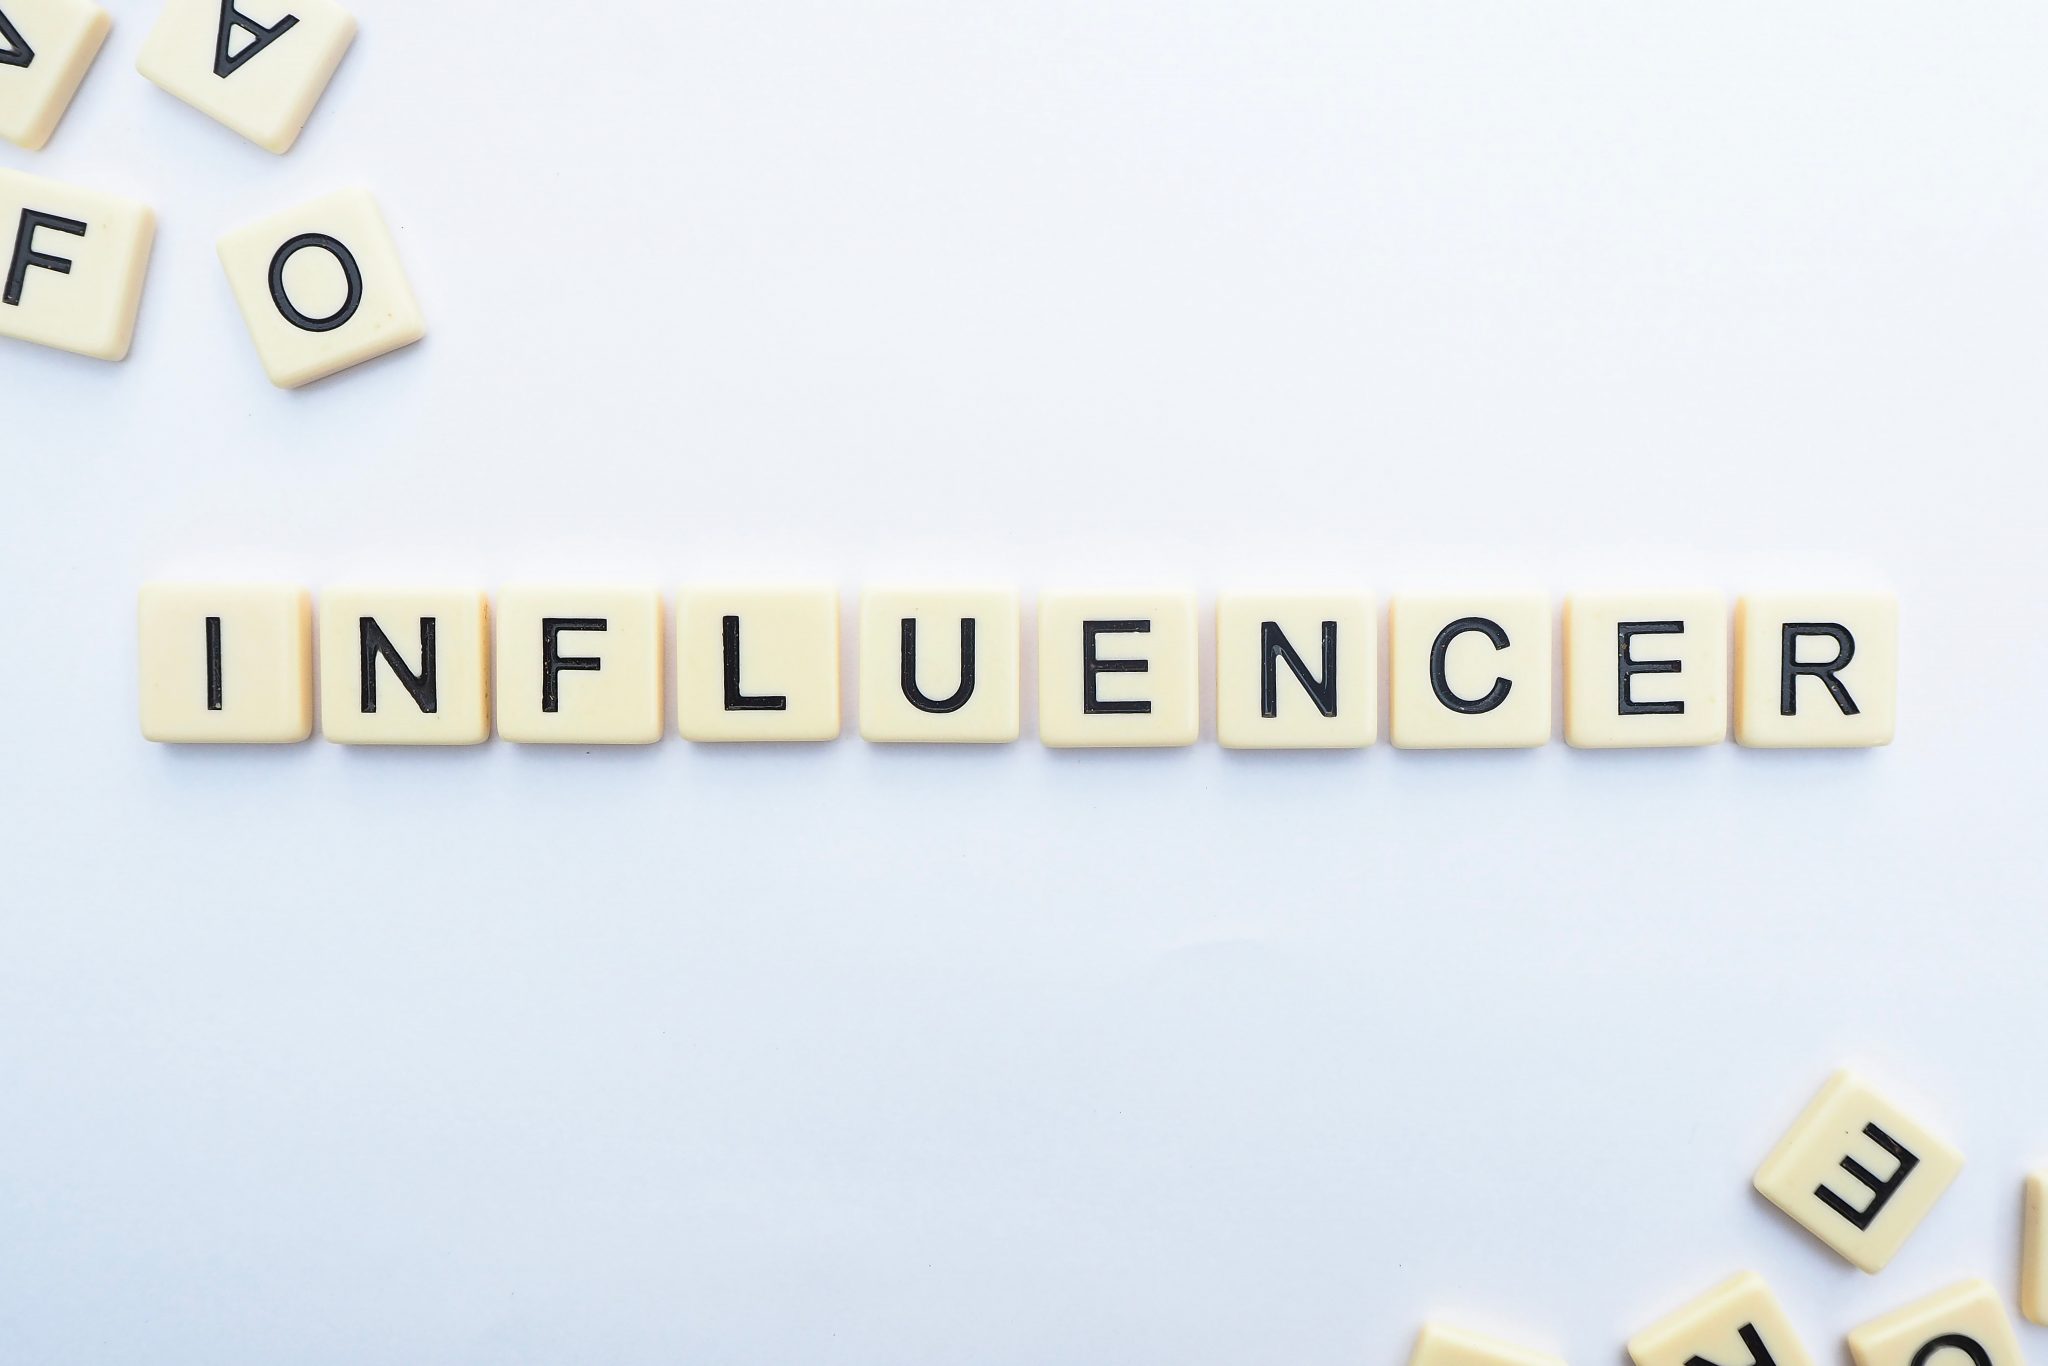 Finding Success with Influencer Marketing in 2021: 5 Strategies for CPG Brands